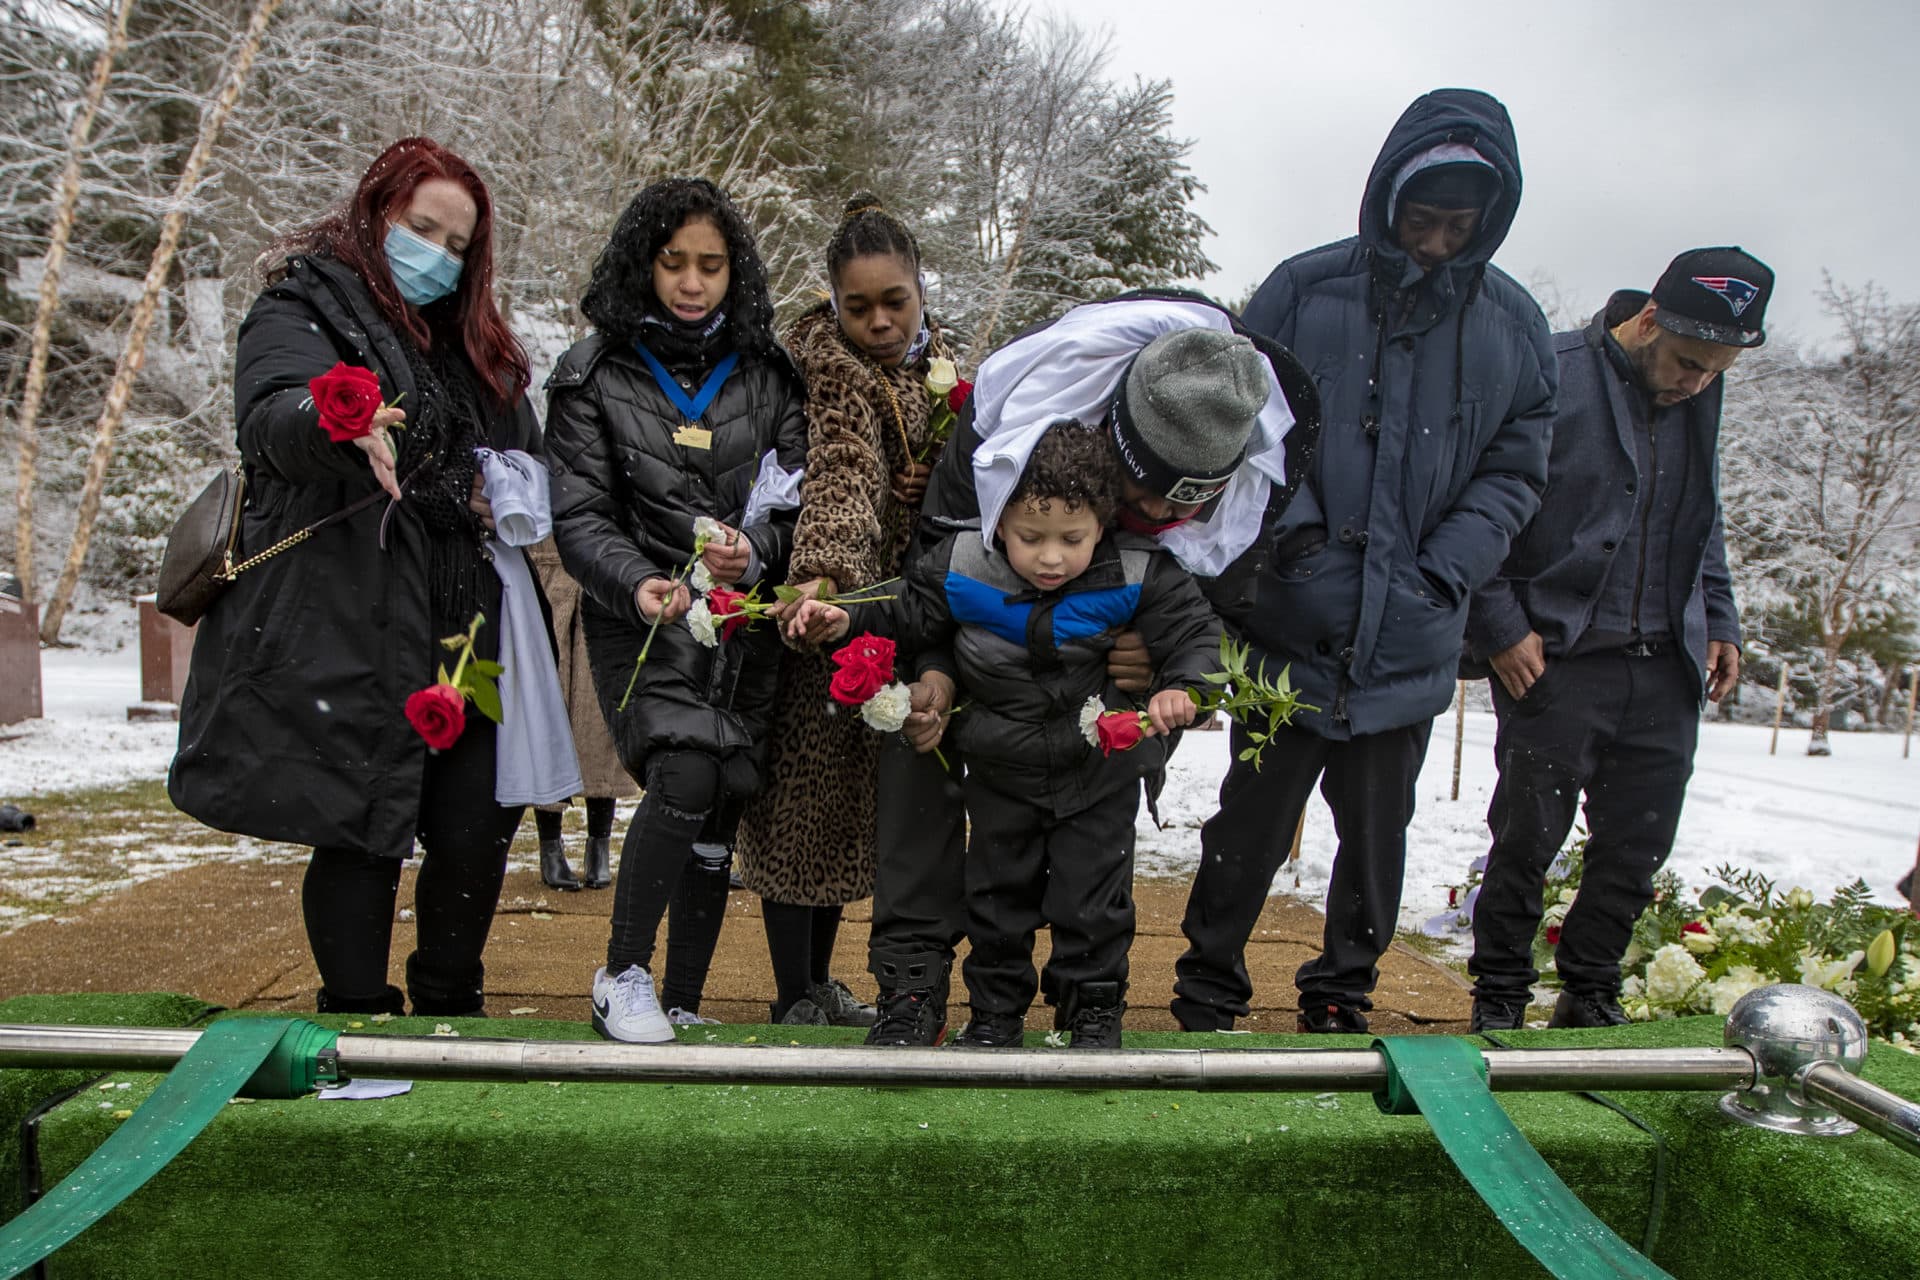 Henry Tapia's family leaves flowers in his grave. (Jesse Costa/WBUR)